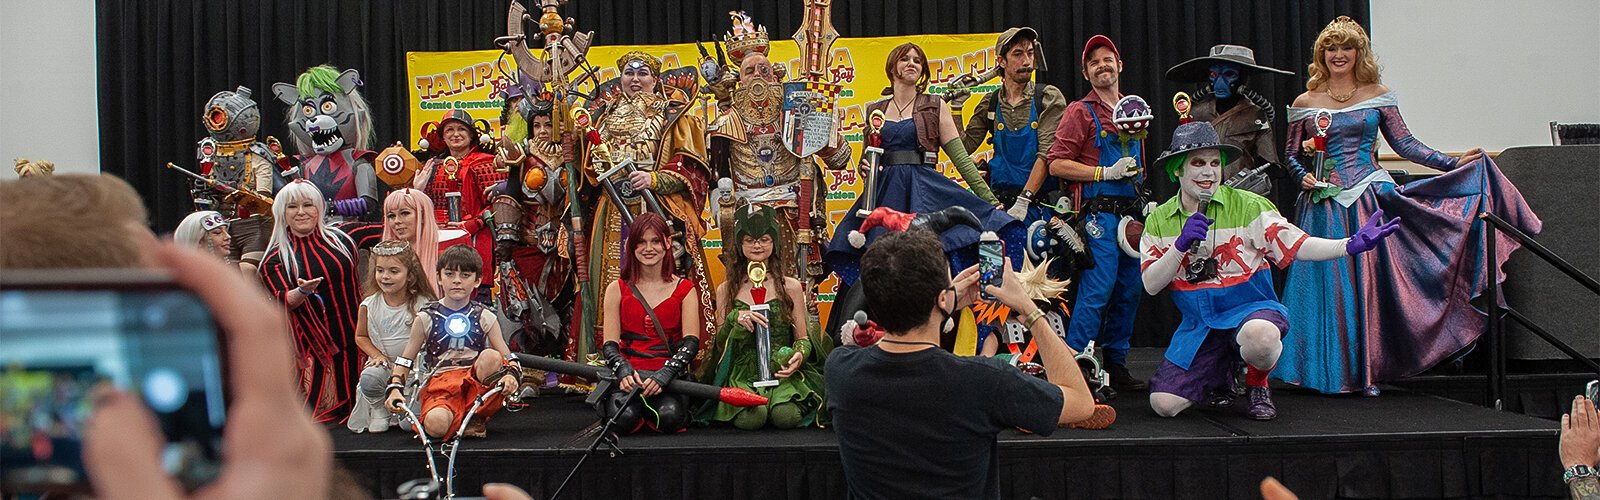 All the winners in every category of the costume contest at the Tampa Bay Comic Con return to the stage for a large group photo.